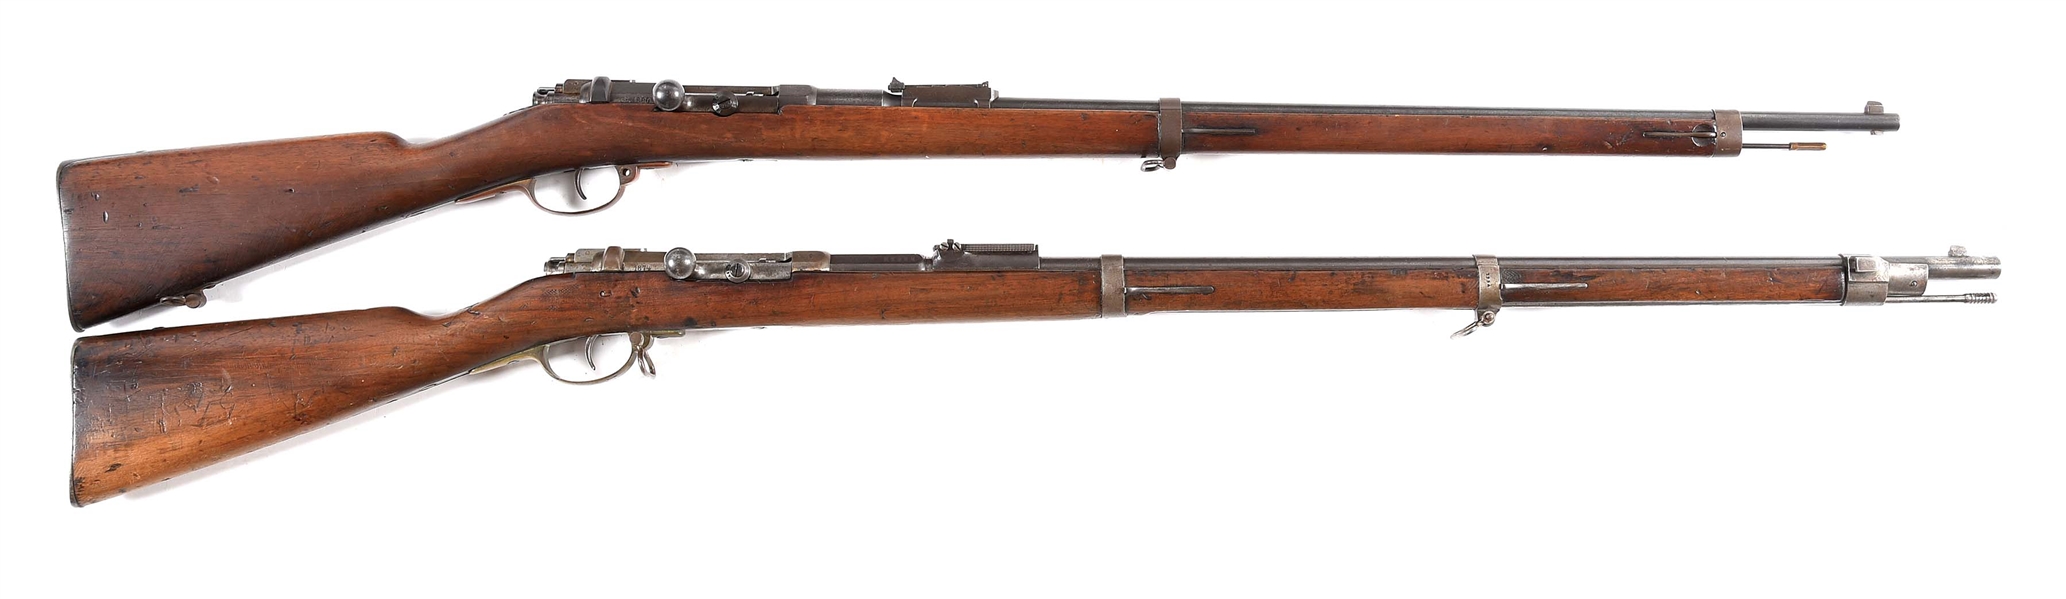 LOT OF TWO: (A) UNCOMMON FRENCH CONVERTED URUGUAYAN MAUSER MODEL 71 BOLT ACTION RIFLE AND (B) MAUSER MODEL 71 BOLT ACTION SINGLE SHOT RIFLE